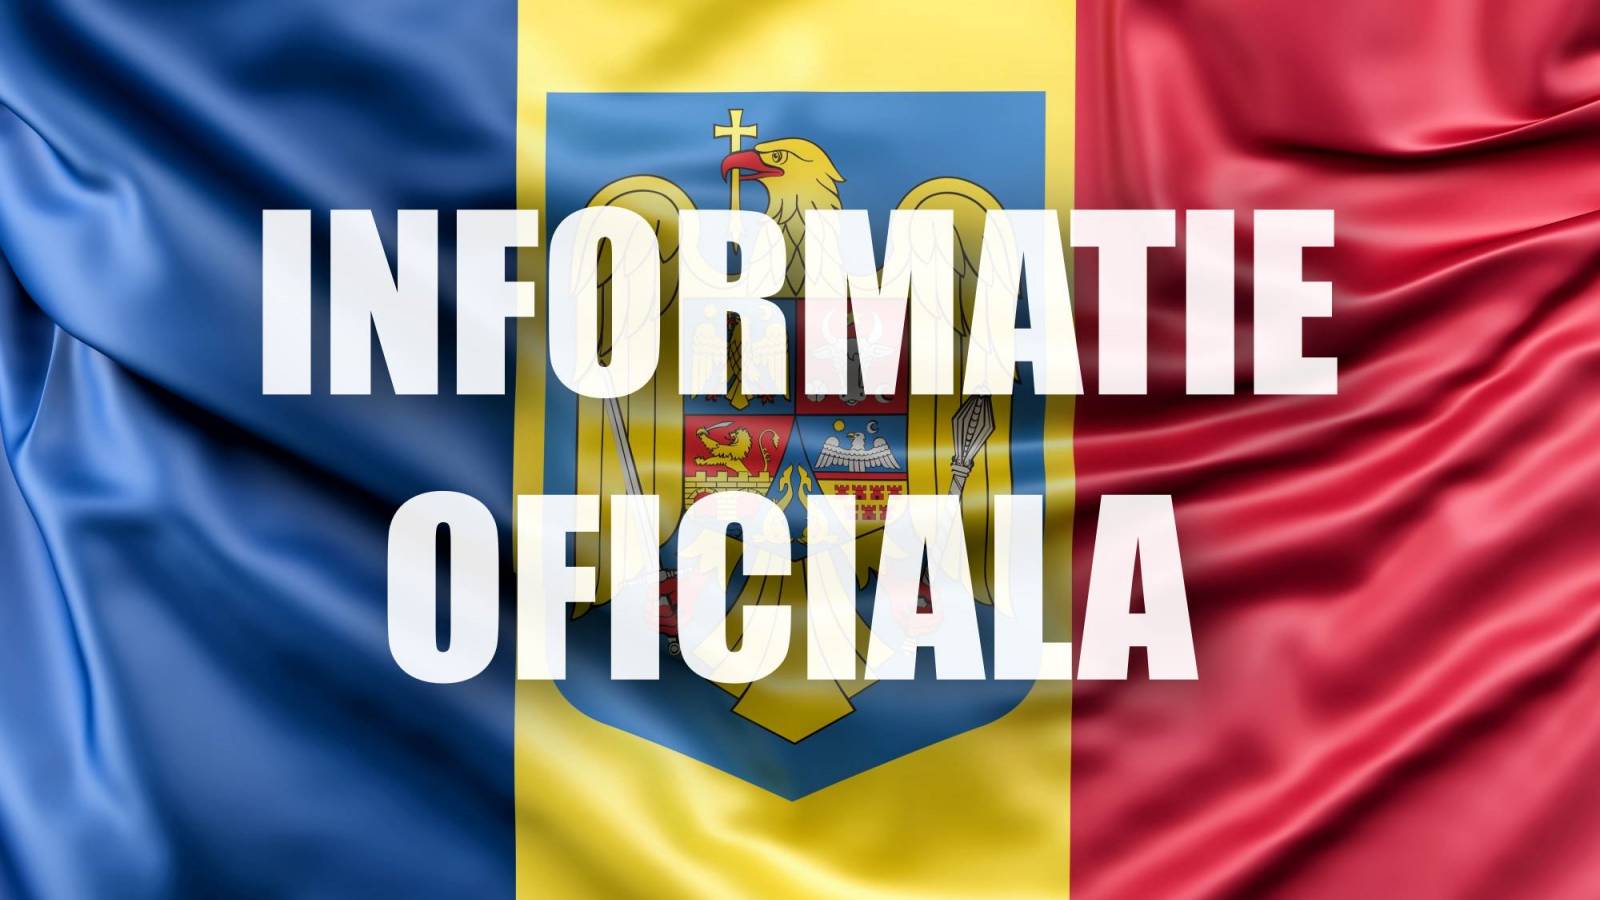 Ministry of Defense Extremely Important PREMIERE Official All Romanians